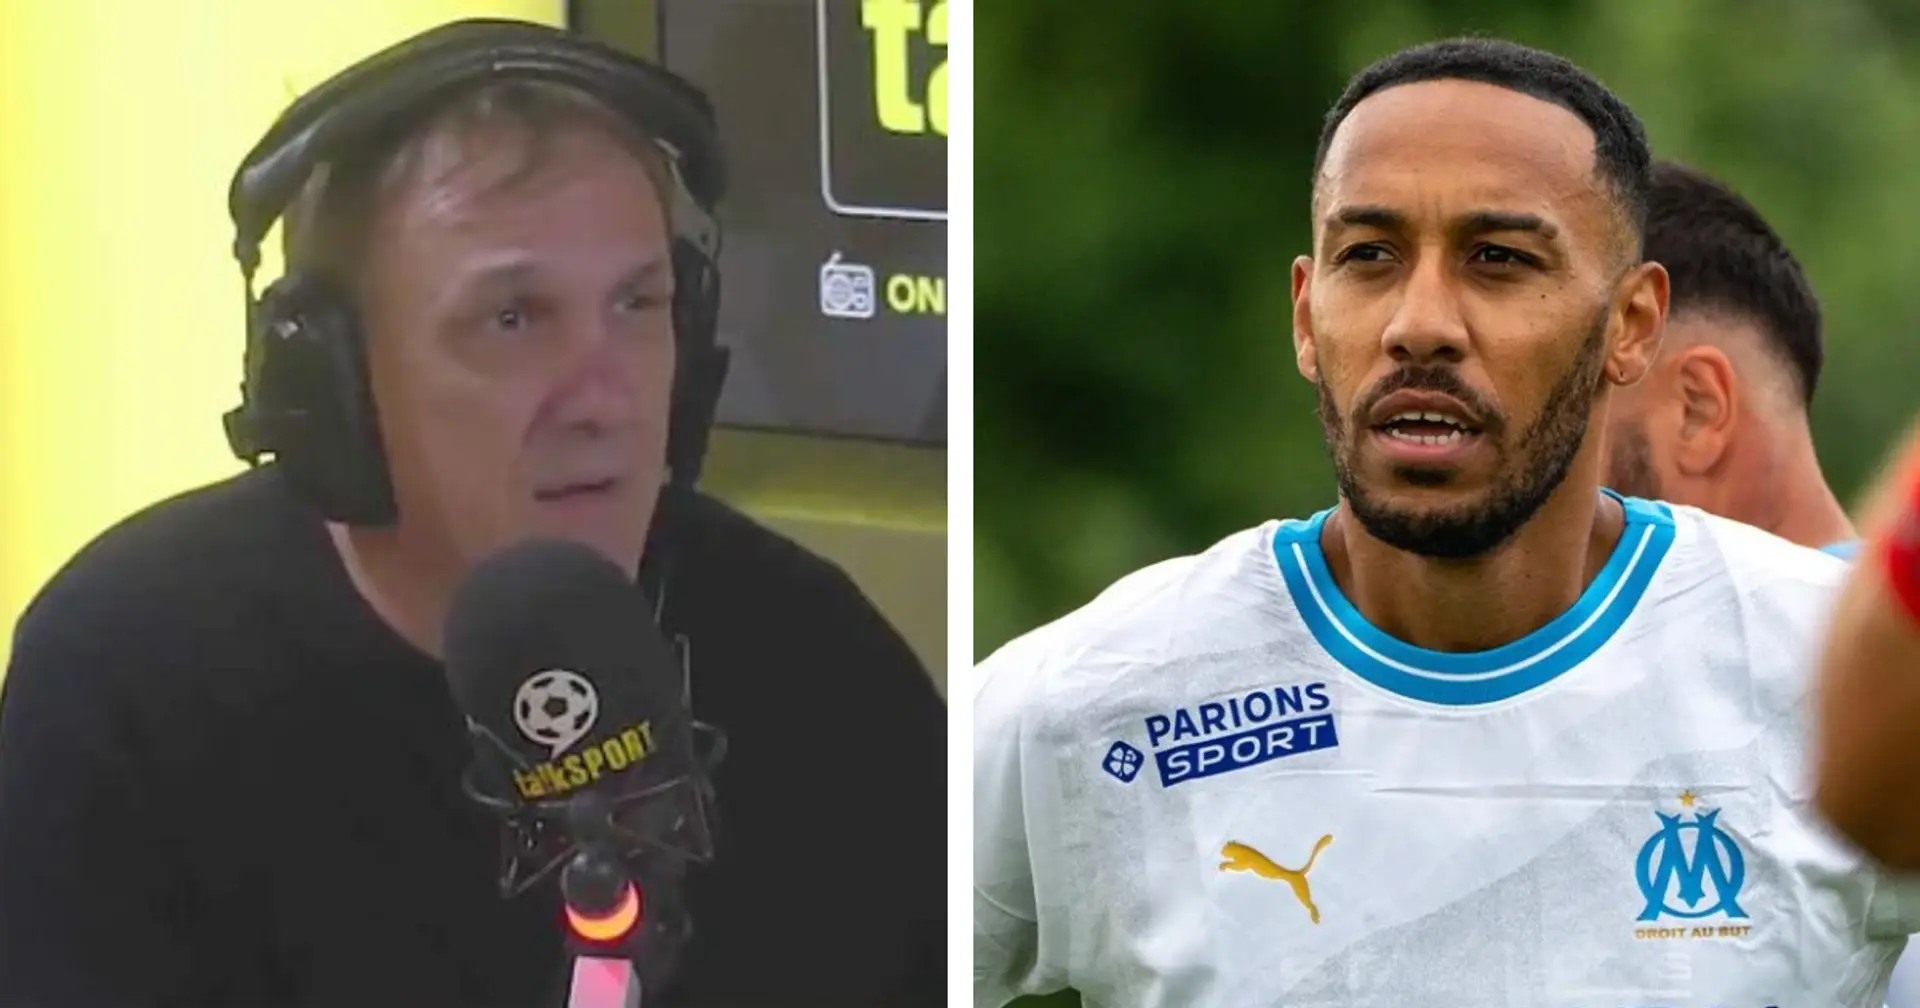 'Marseille got caught in the memory of a player': Tony Cascarino baffled by Aubameyang's Ligue 1 move